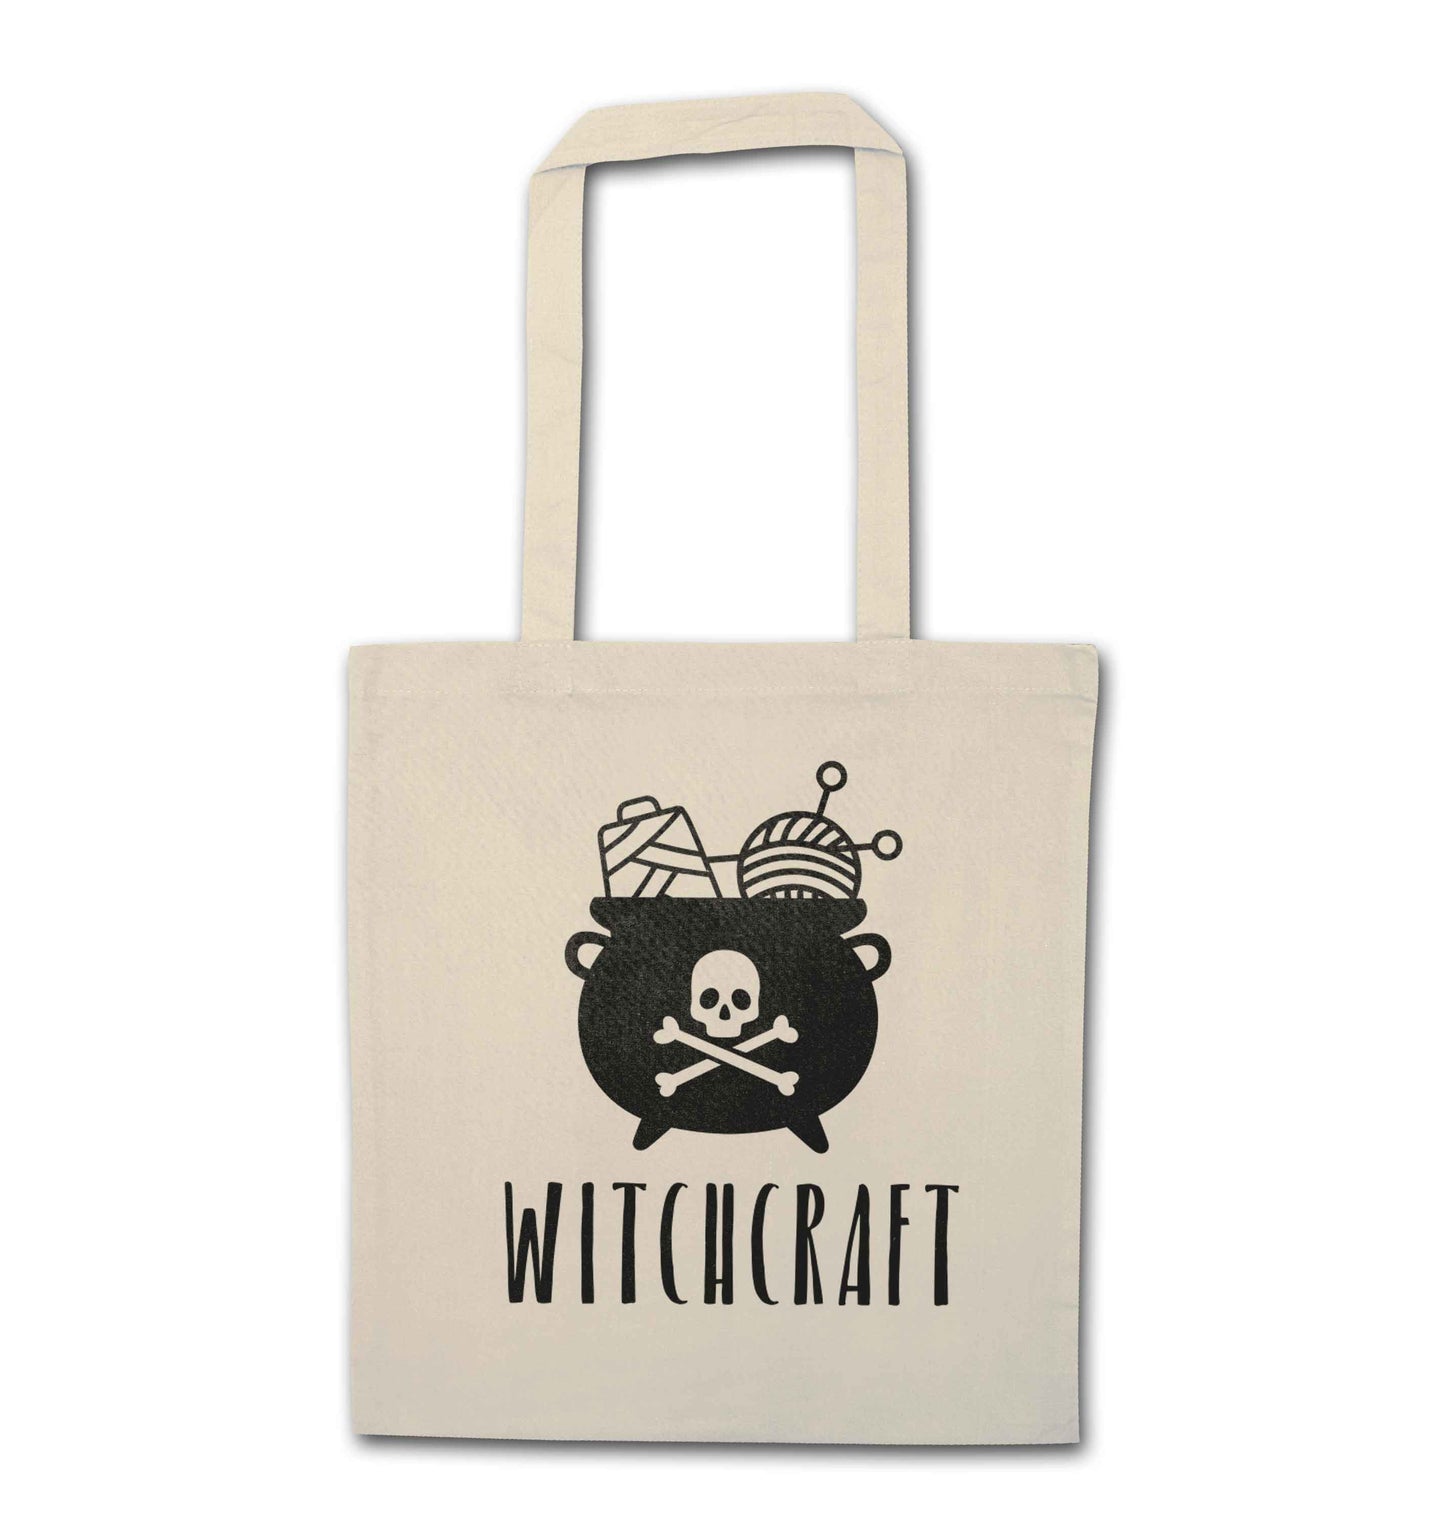 Witchcraft natural tote bag